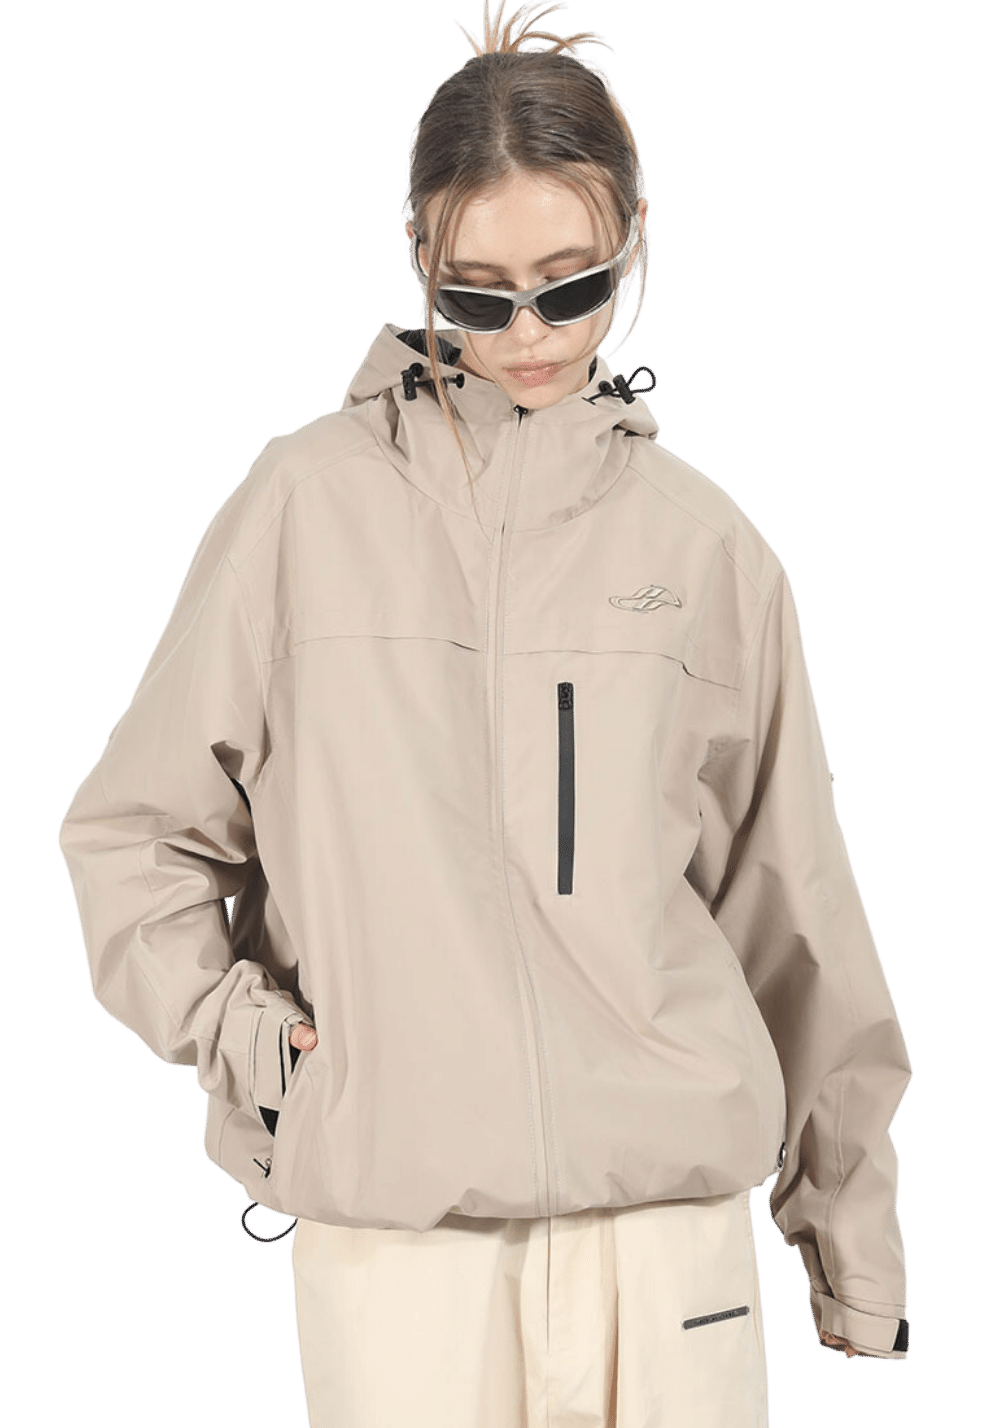 Casual Sports Outdoor Jacket - PSYLOS 1, Casual Sports Outdoor Jacket, Jacket, HARSH AND CRUEL, PSYLOS 1